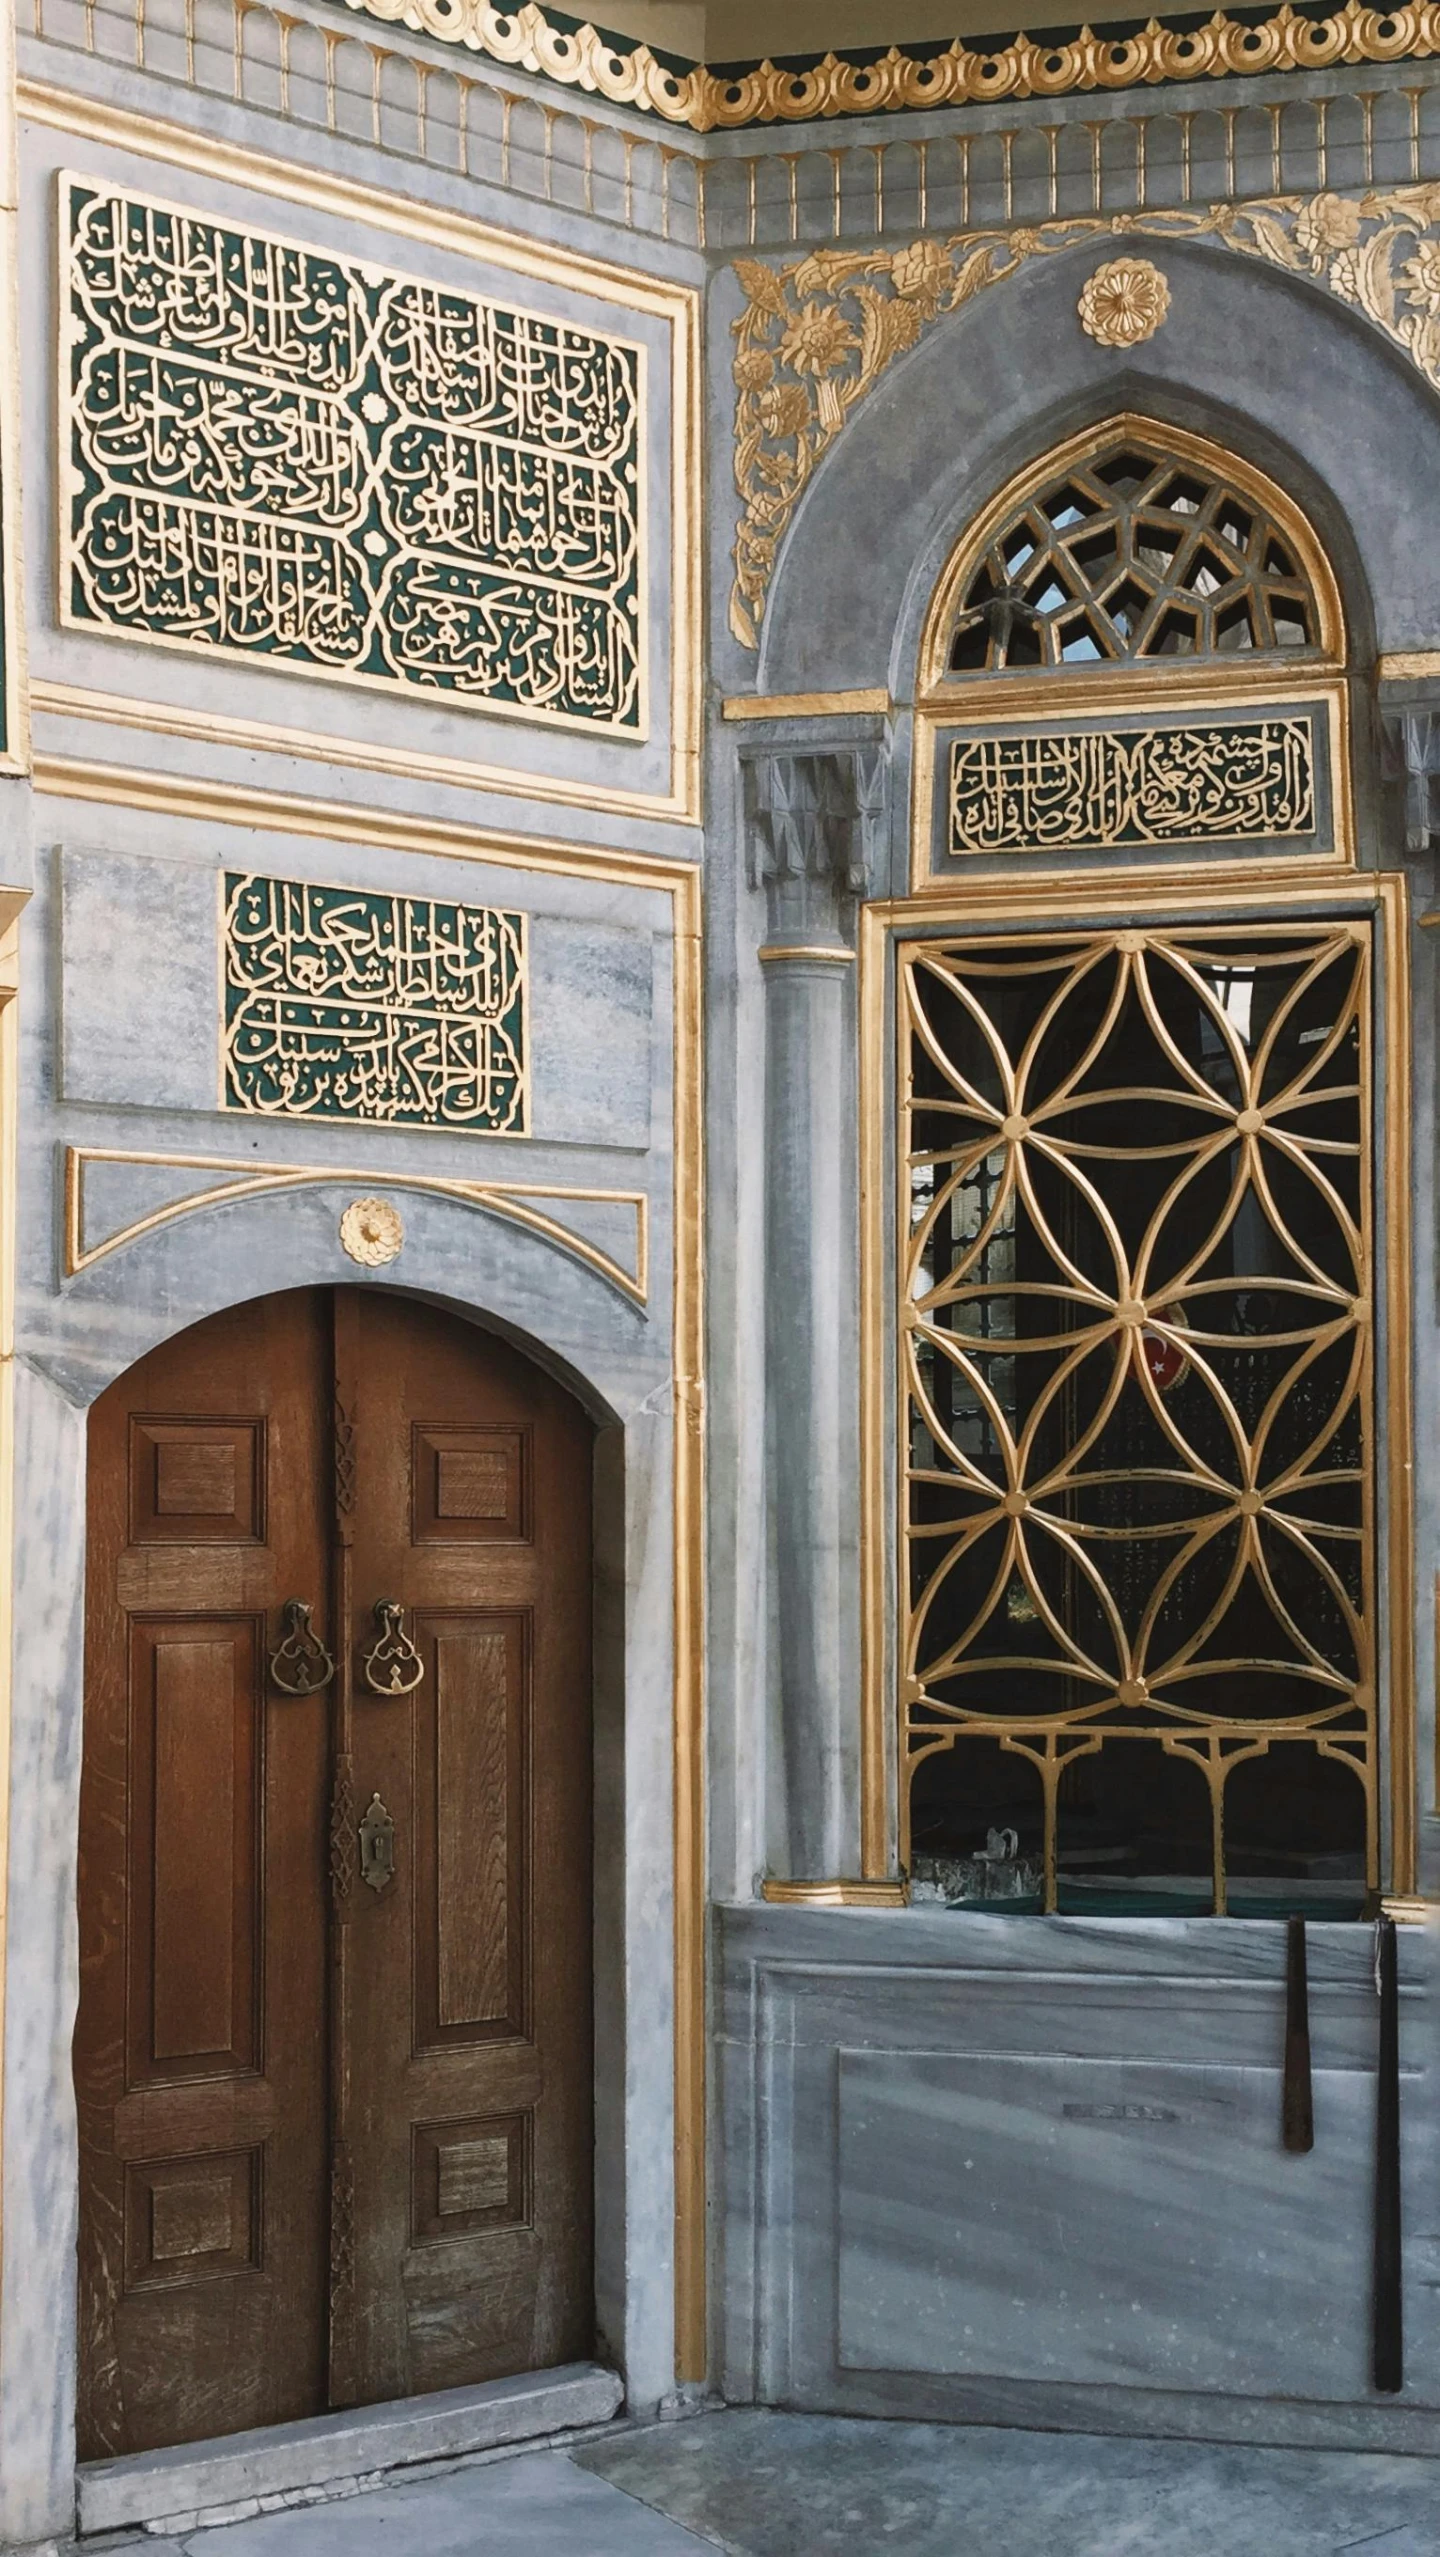 a doorway of a large ornate building with carvings and decorative elements